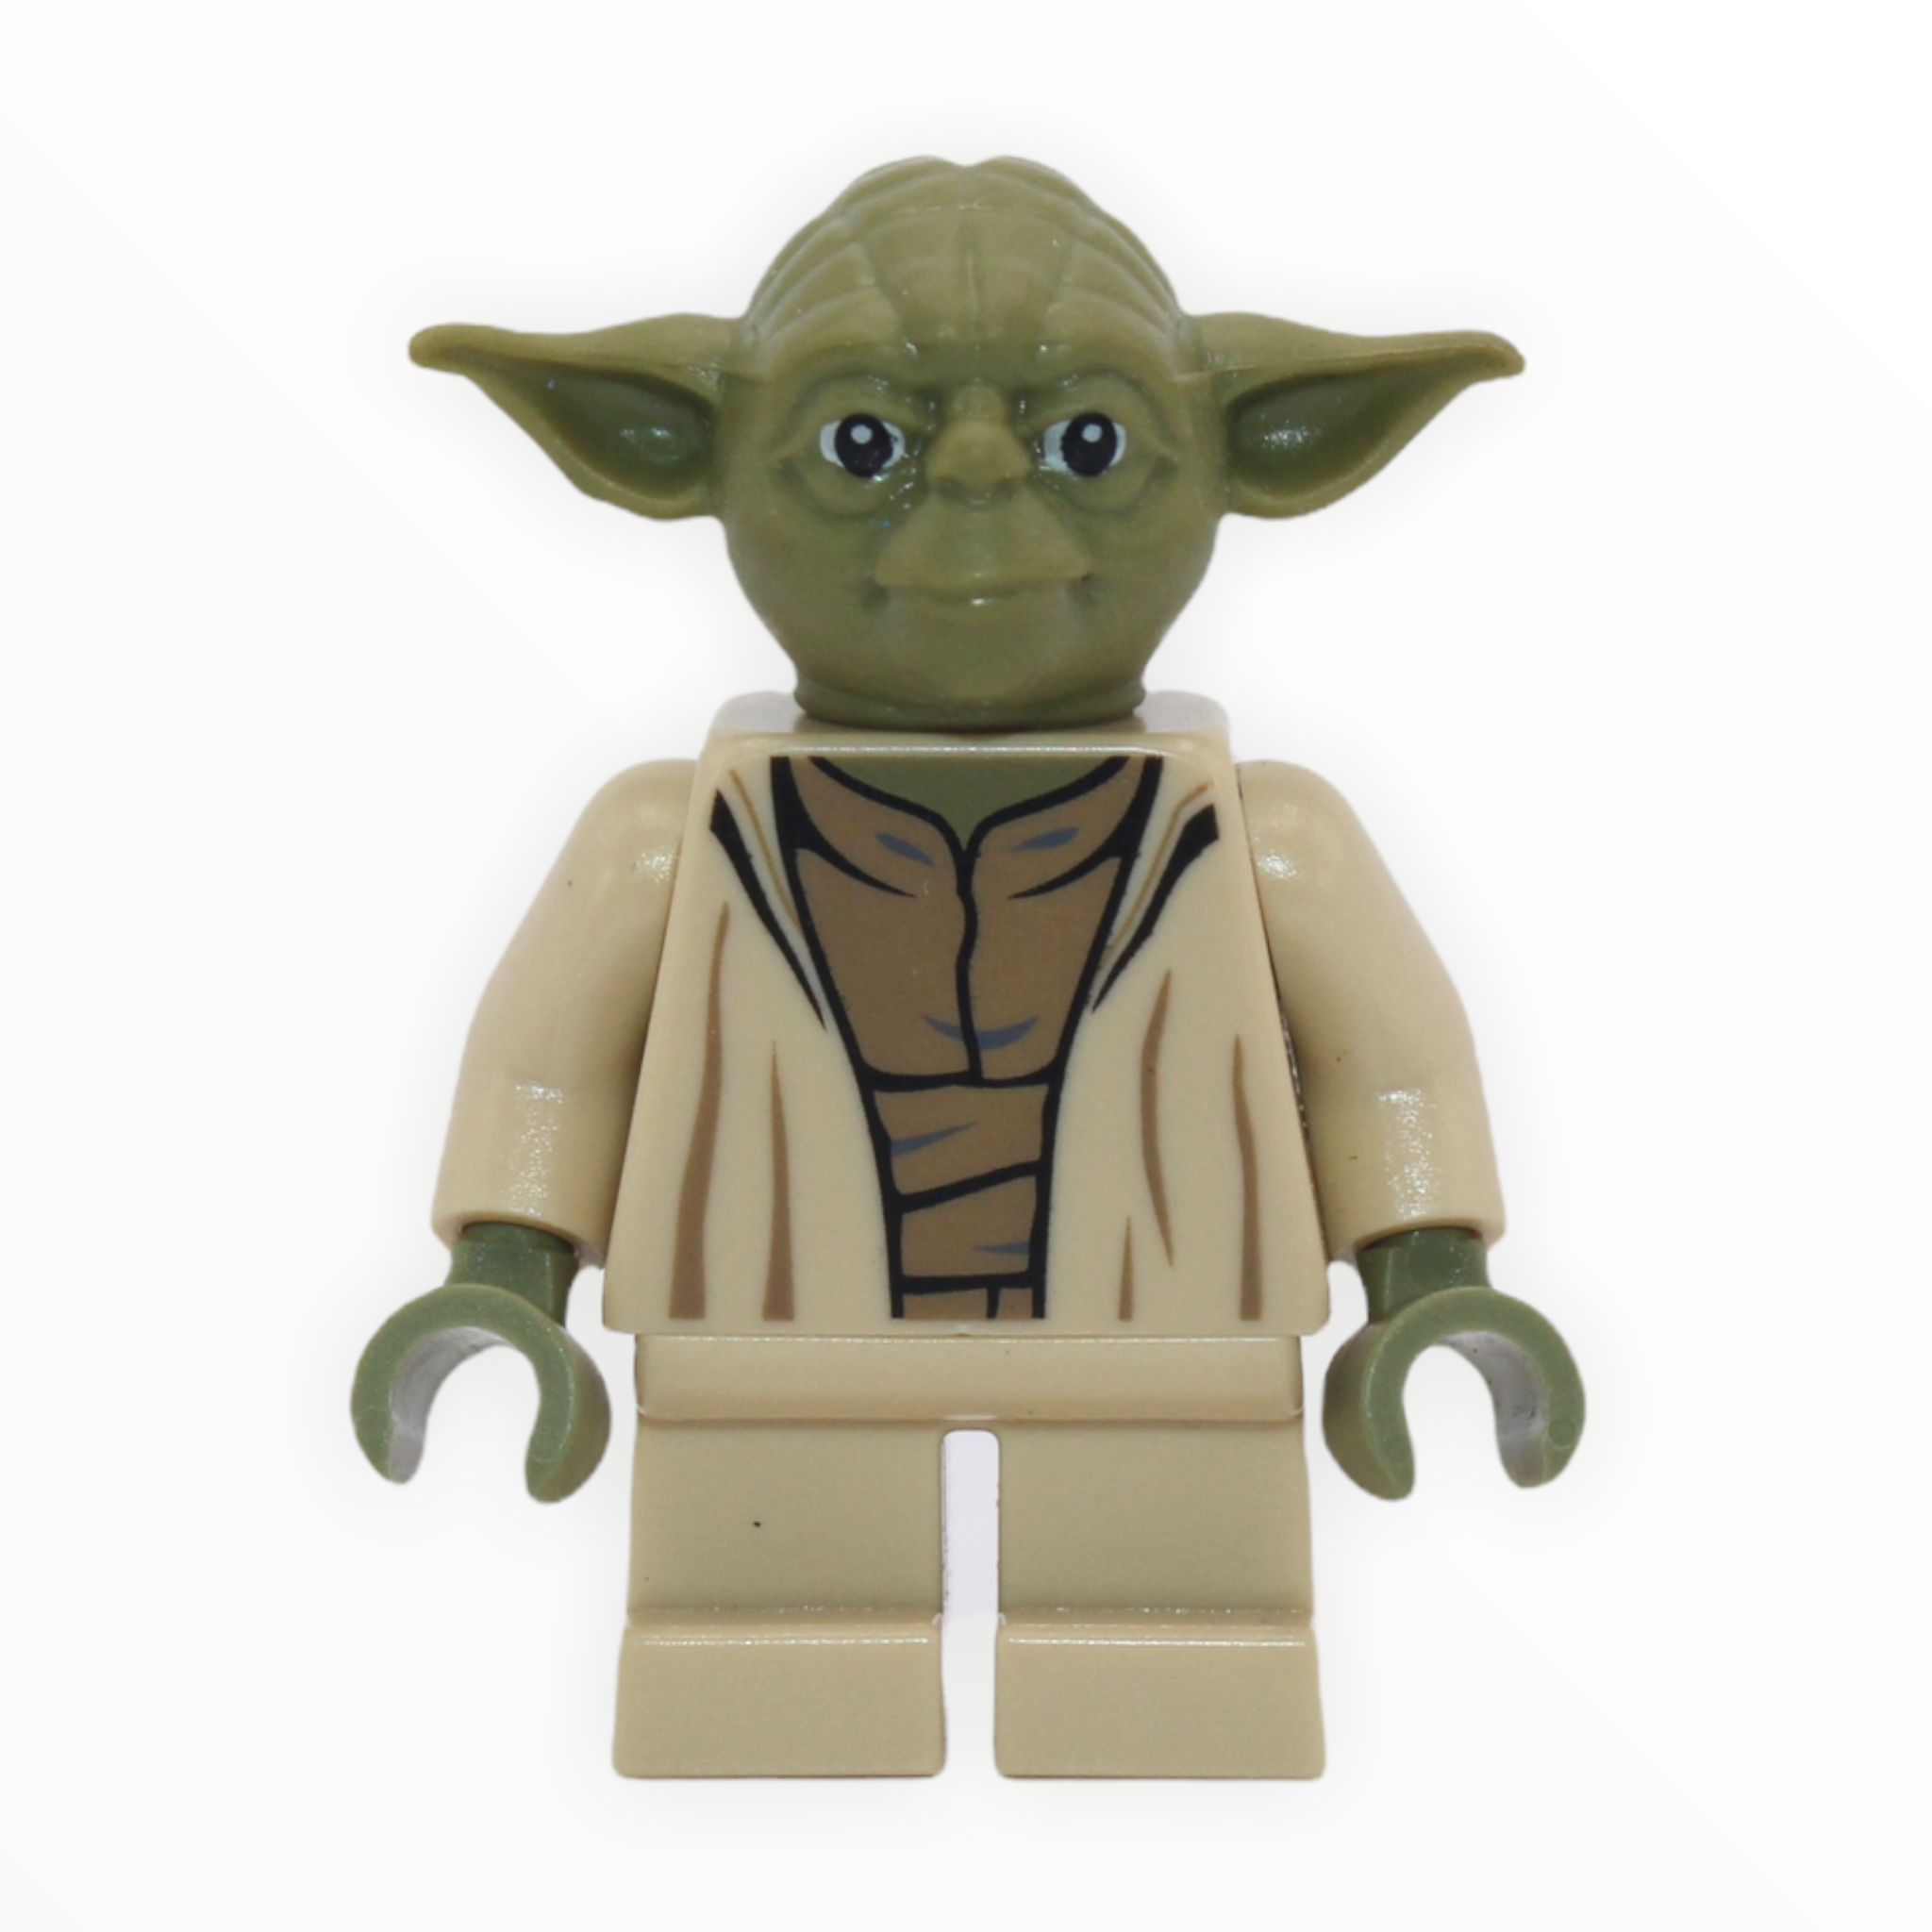 Yoda (olive green, robe with large creases, 2016)